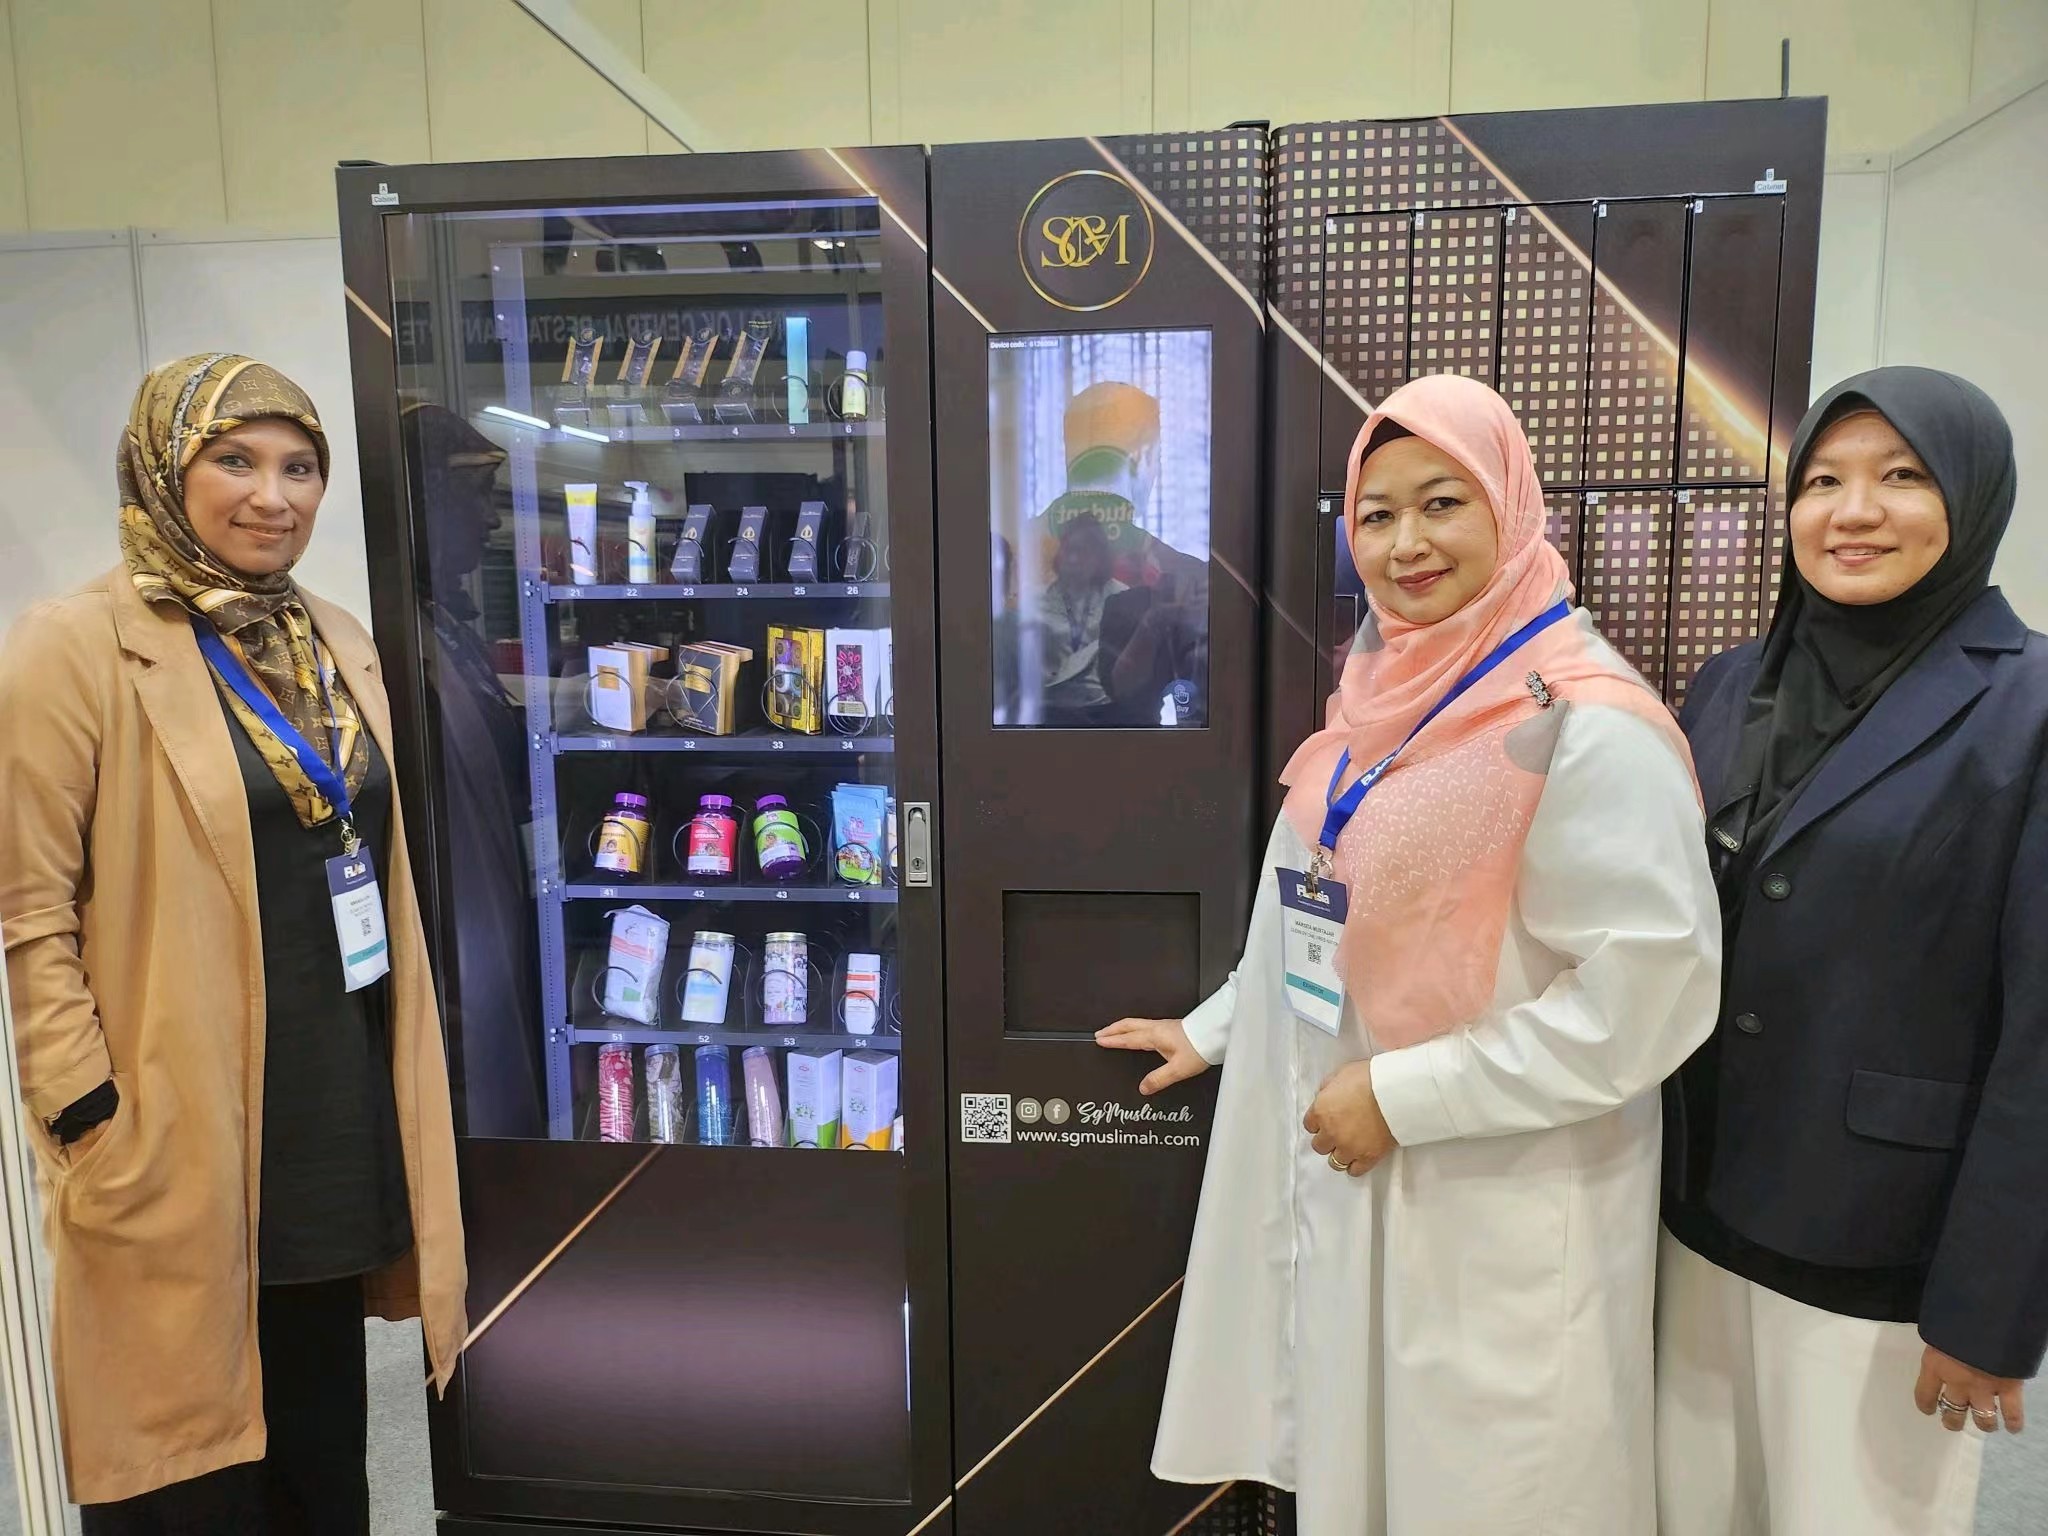 Weimi smart vending machine for personal care products at the vending exhibition in Singapore.